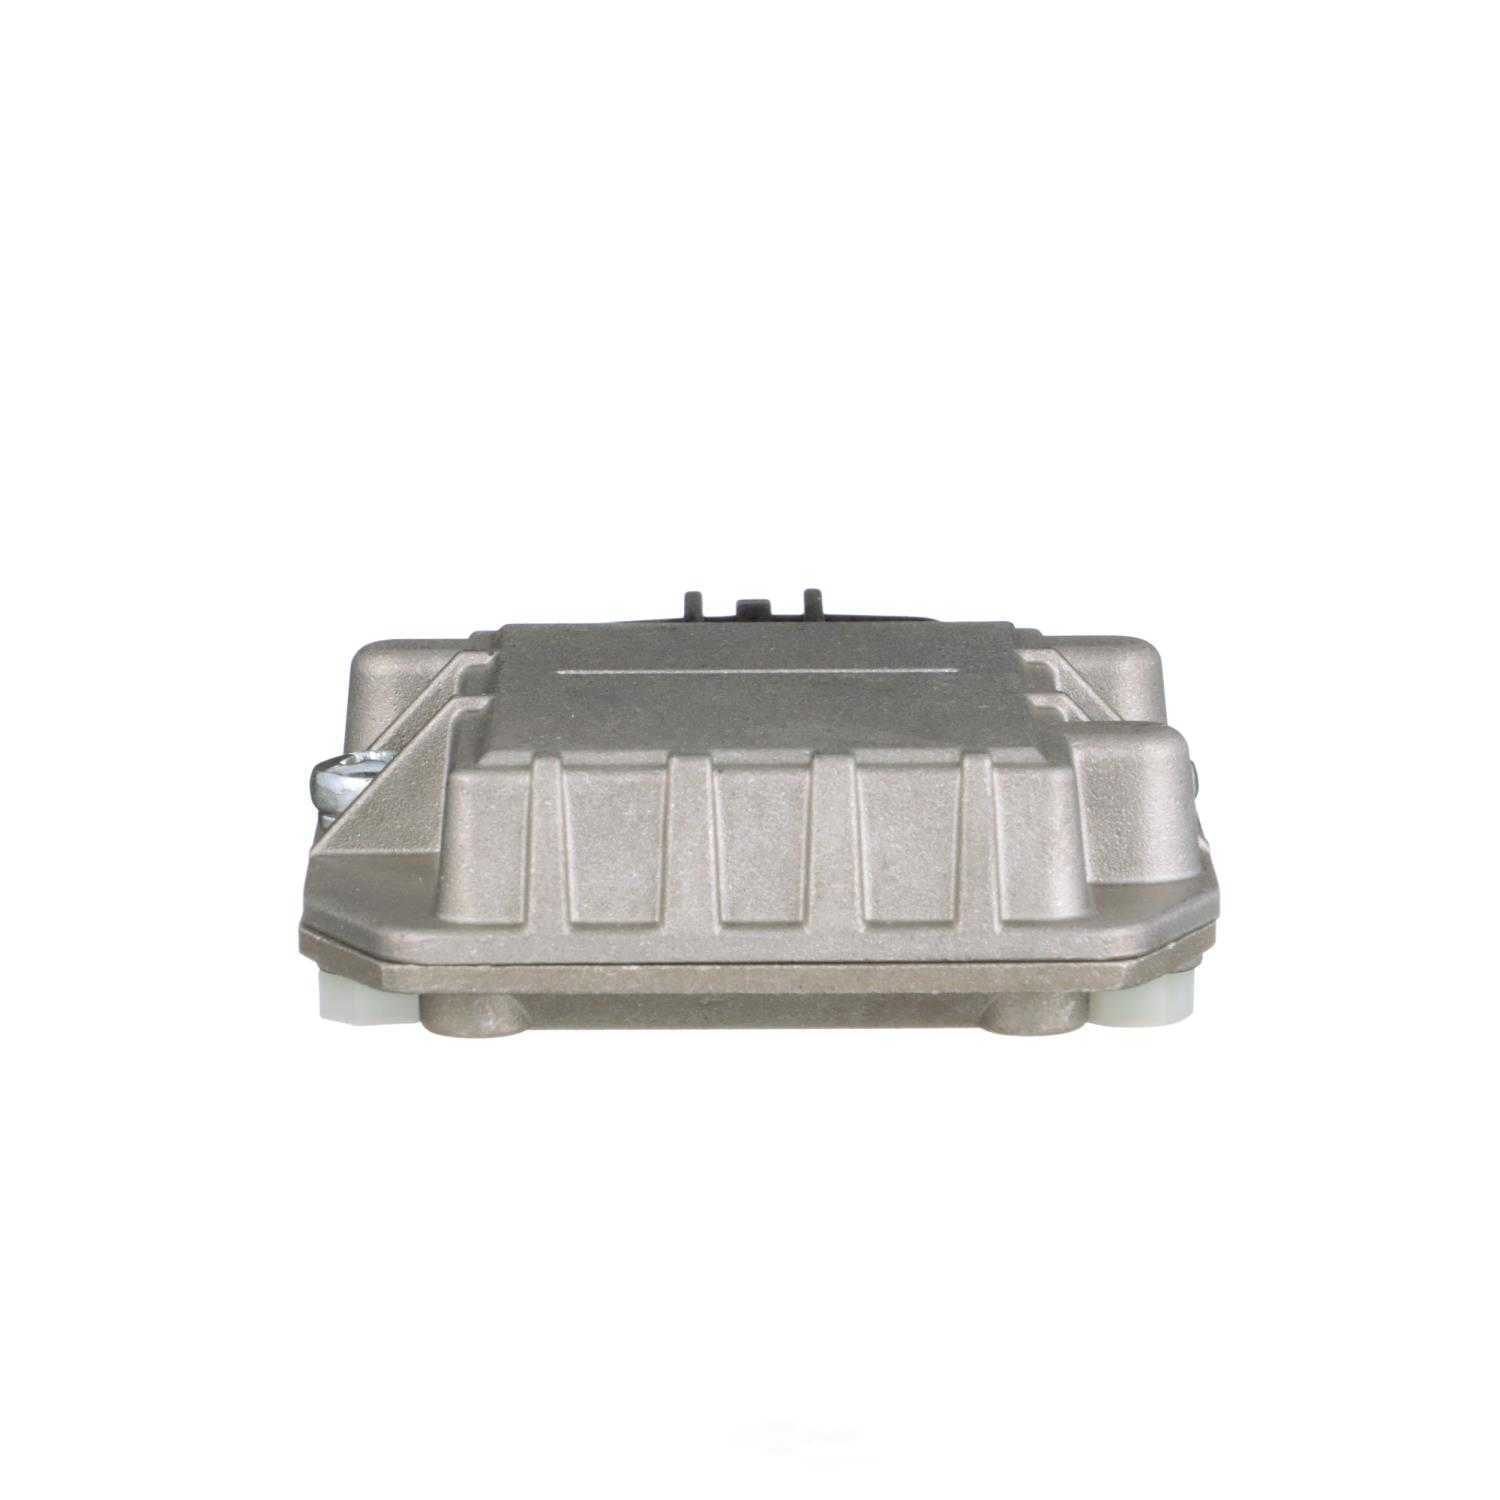 STANDARD MOTOR PRODUCTS - Ignition Control Module - STA LX-723